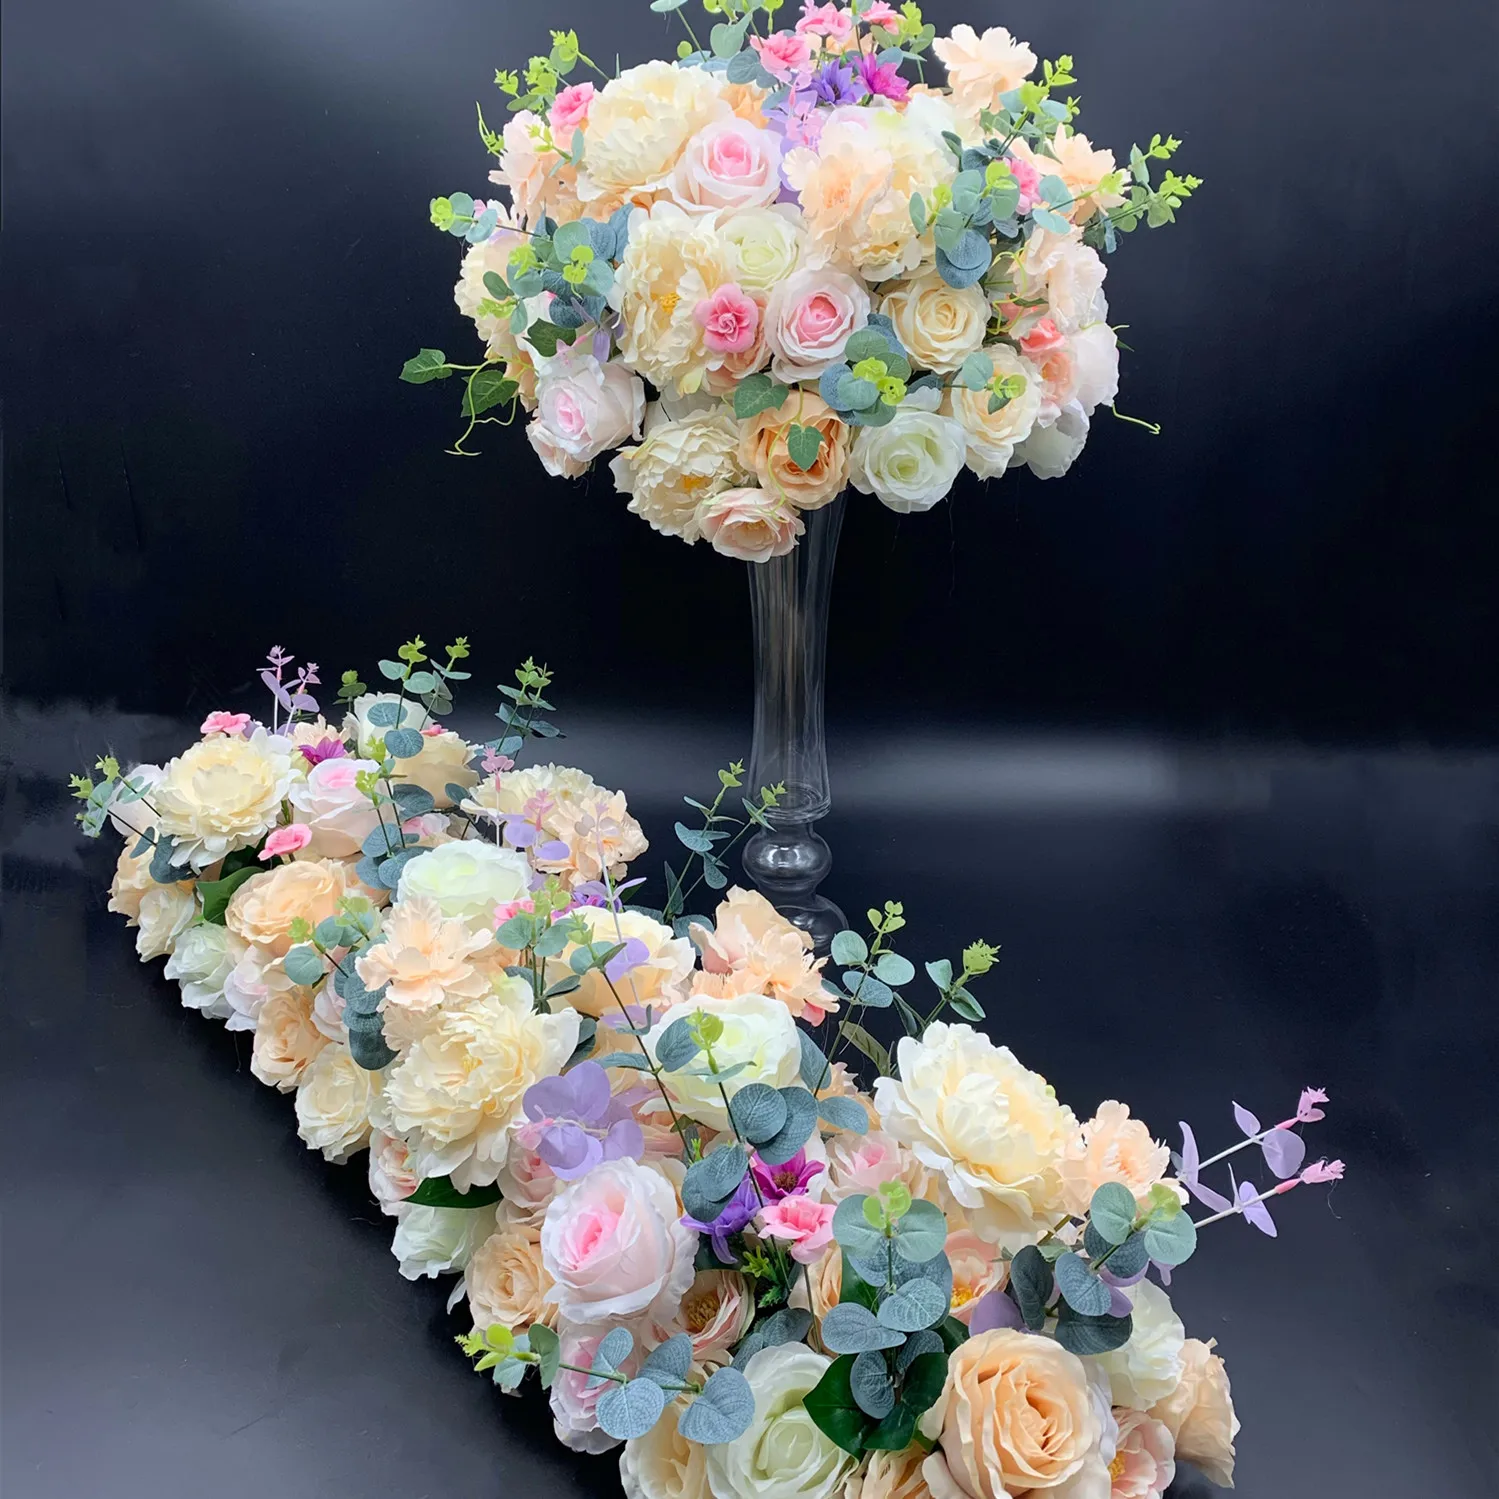 

QSLH-V030 Customized Wedding Table Centerpieces Silk Flowers Kissing Ball Artificial Flower Ball For Wedding Decoration